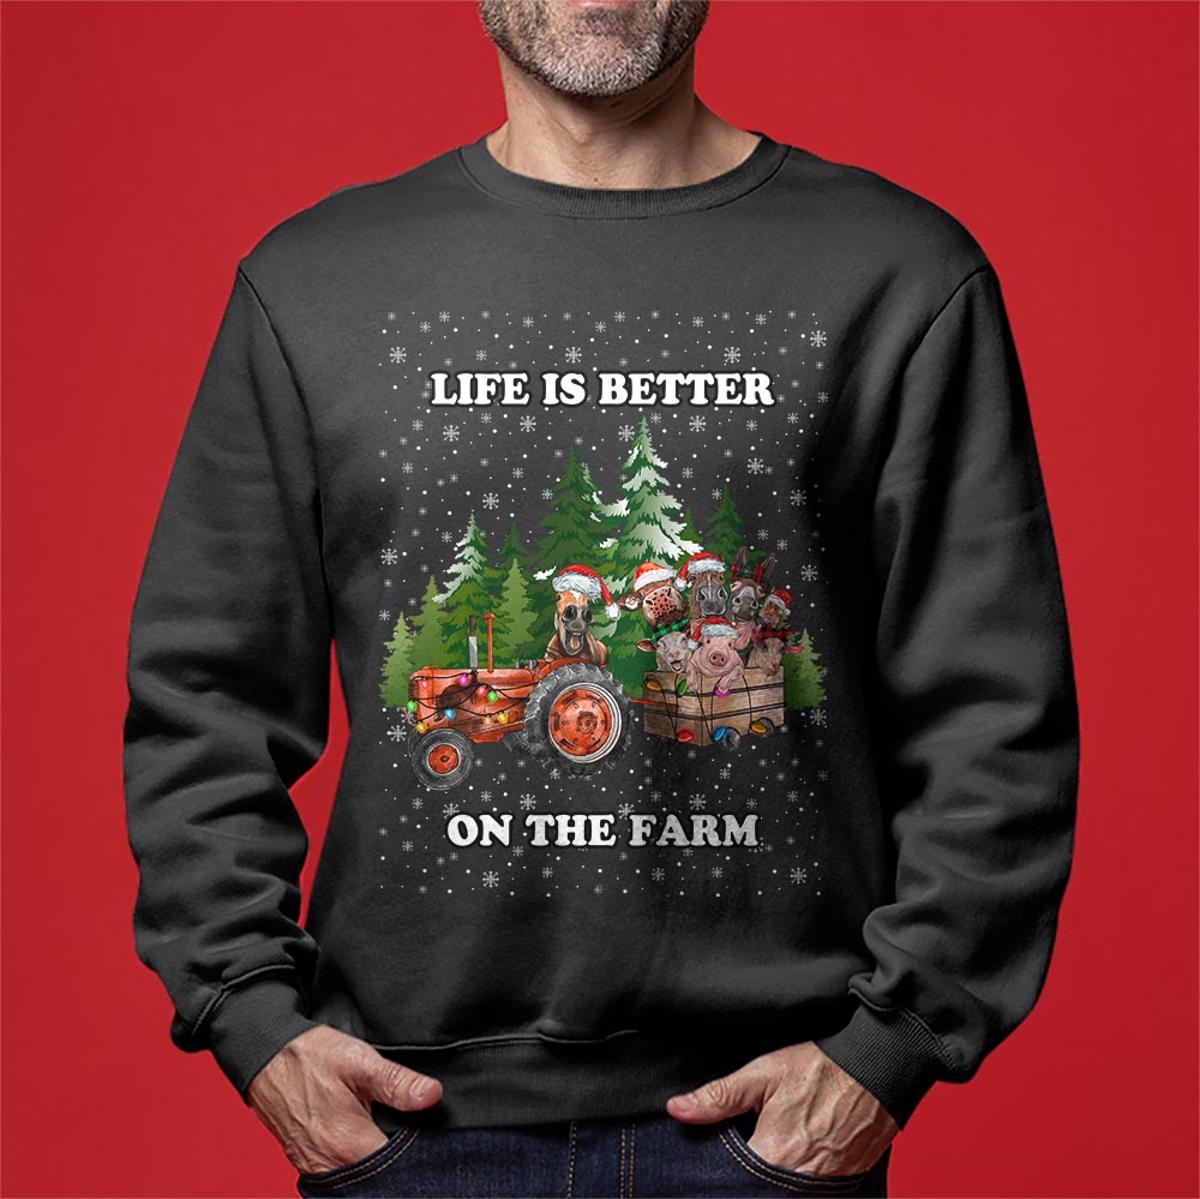 Ain’t No Laws When You’re Drinking With Claus Personalized Ugly Sweater